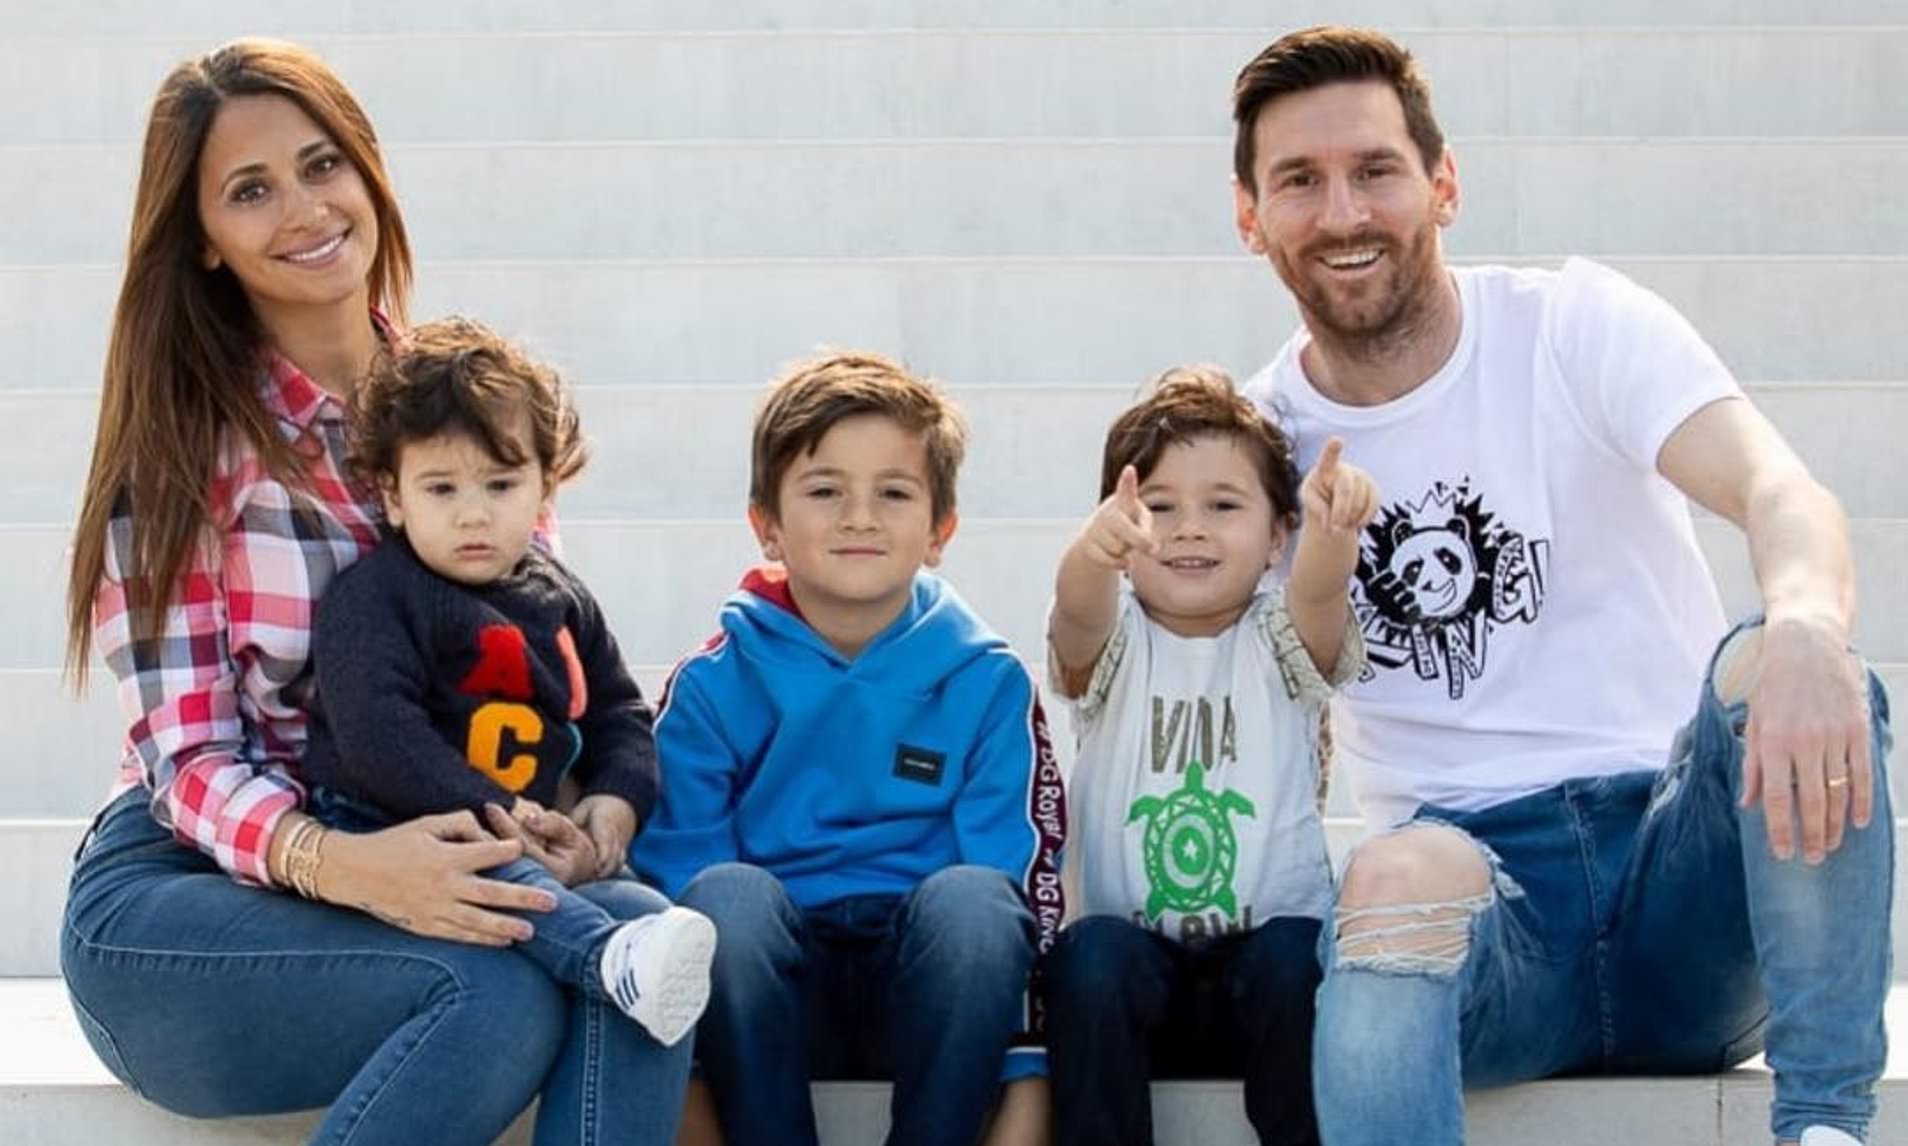 Is Lionel Messi Gay